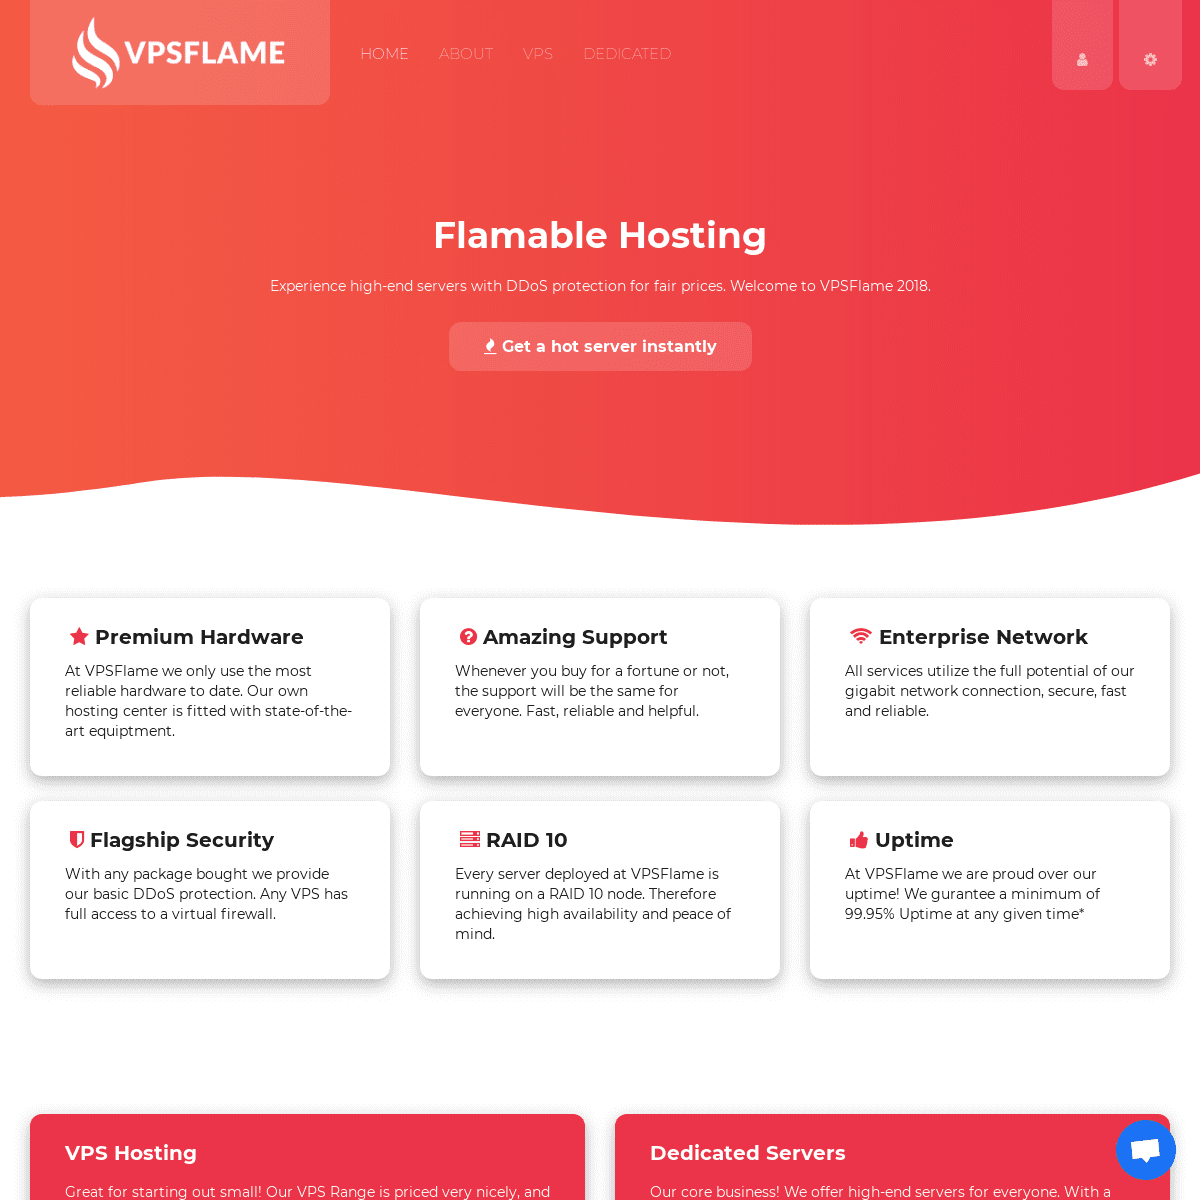 A complete backup of vpsflame.com